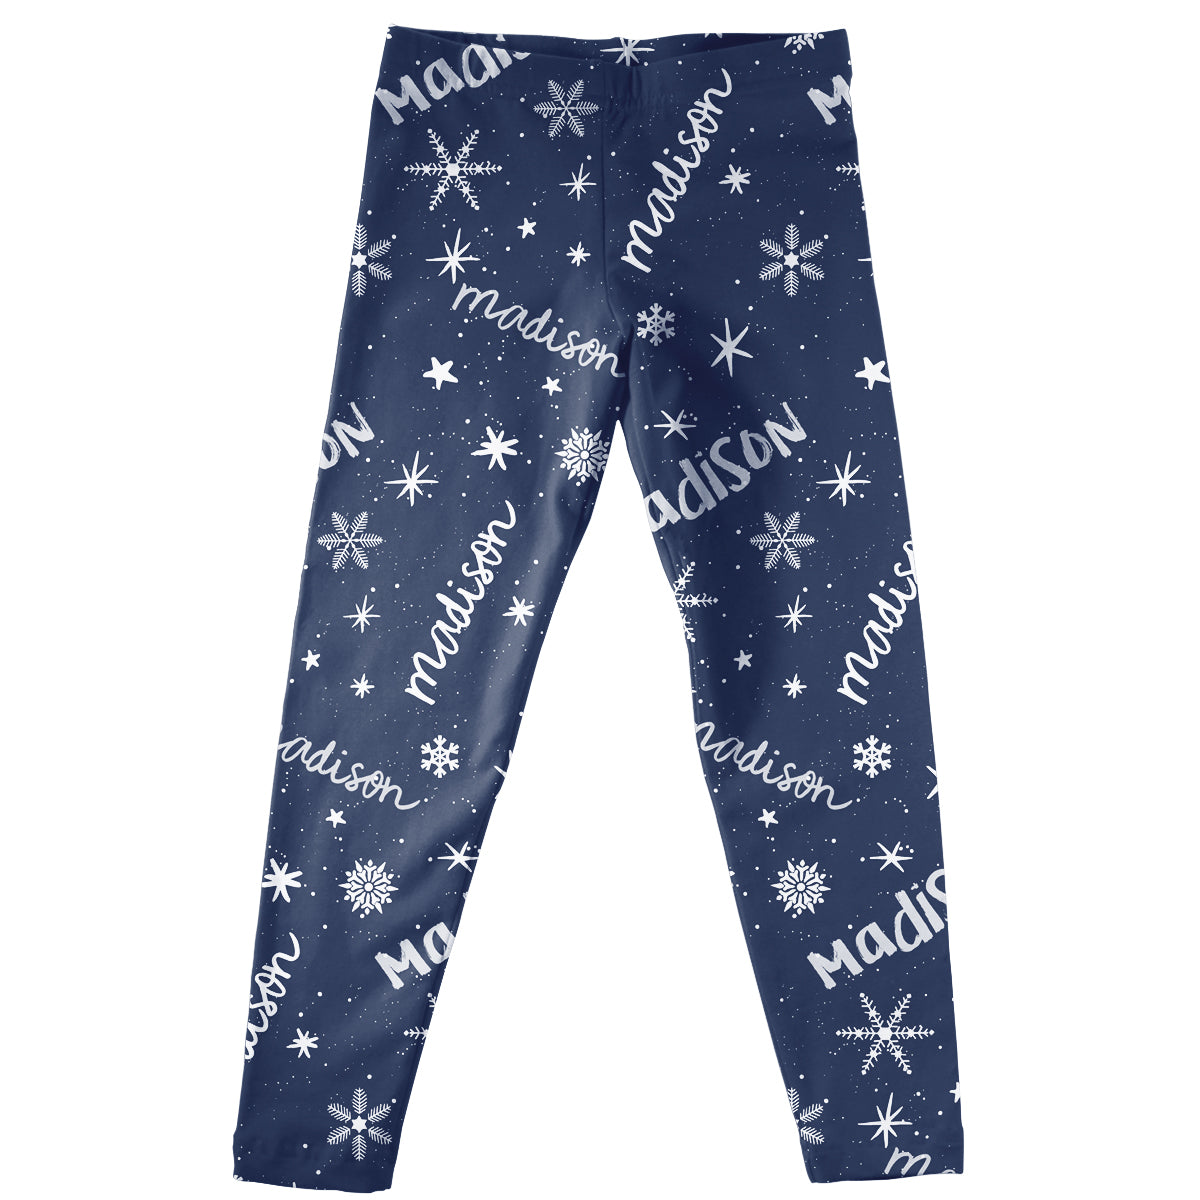 Stars and Name Print Navy Leggings - Wimziy&Co.